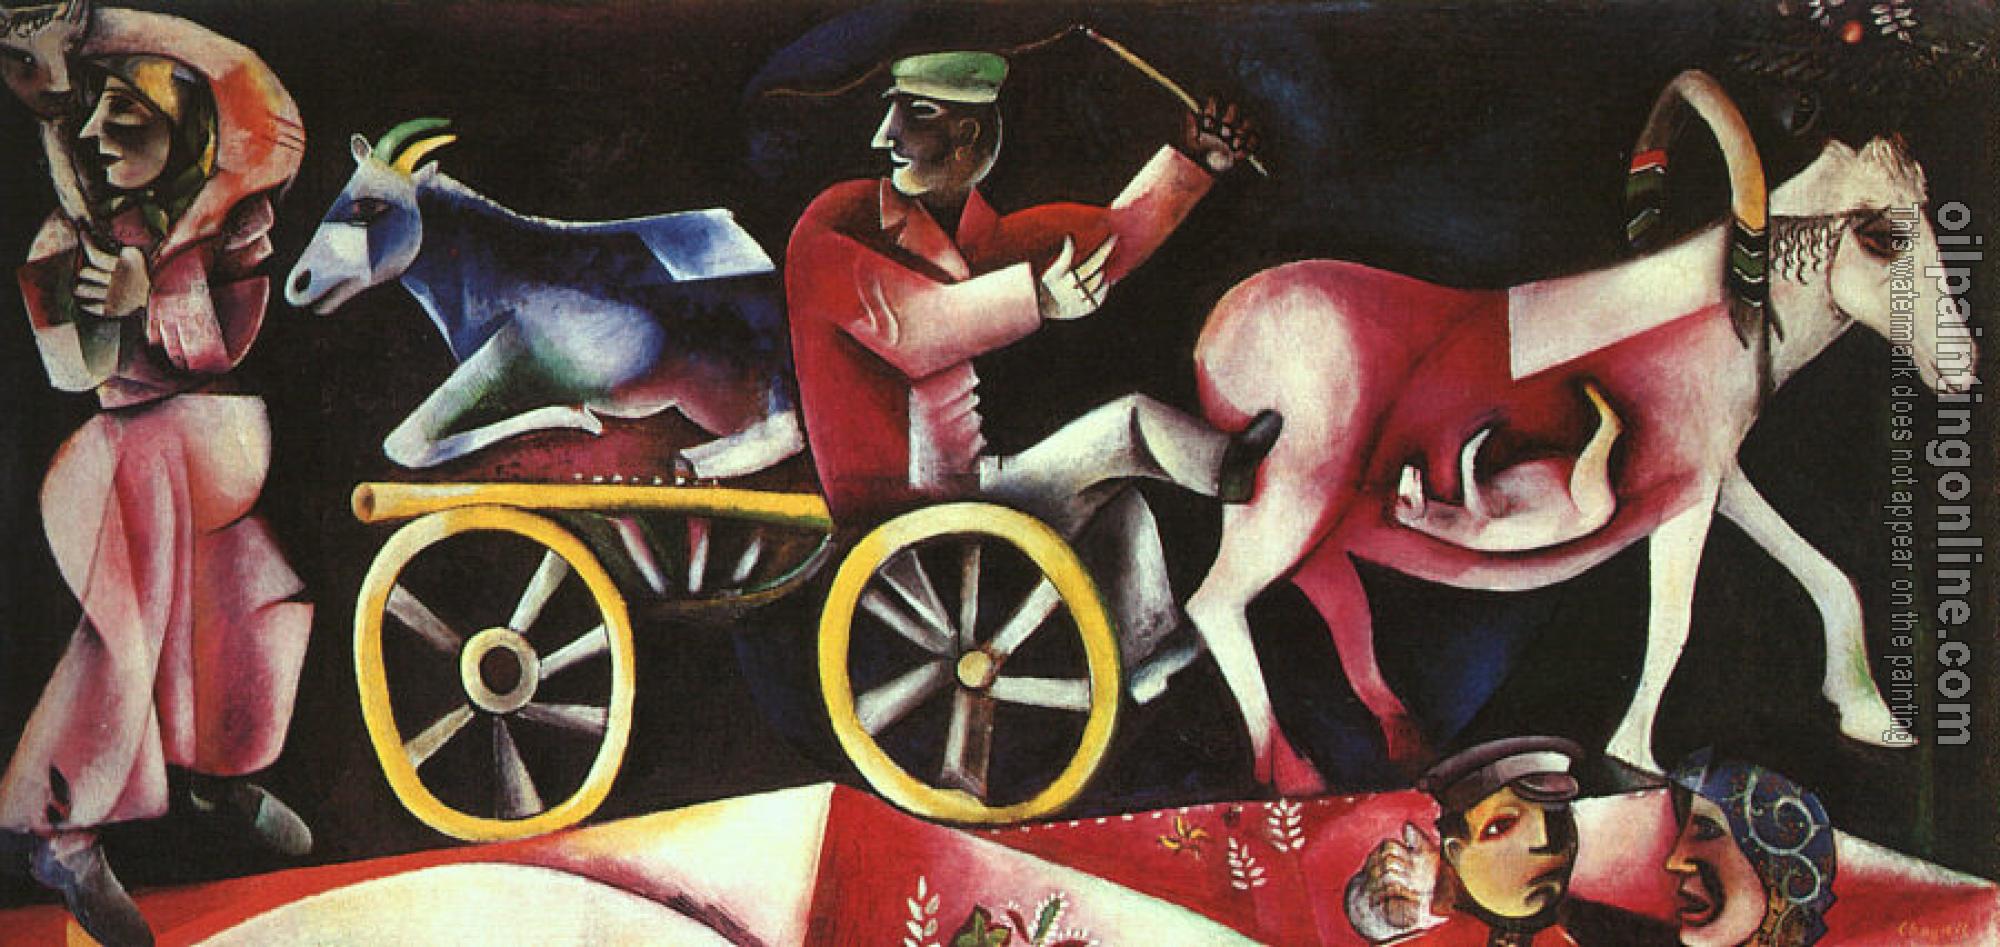 Chagall, Marc - The Cattle Dealer